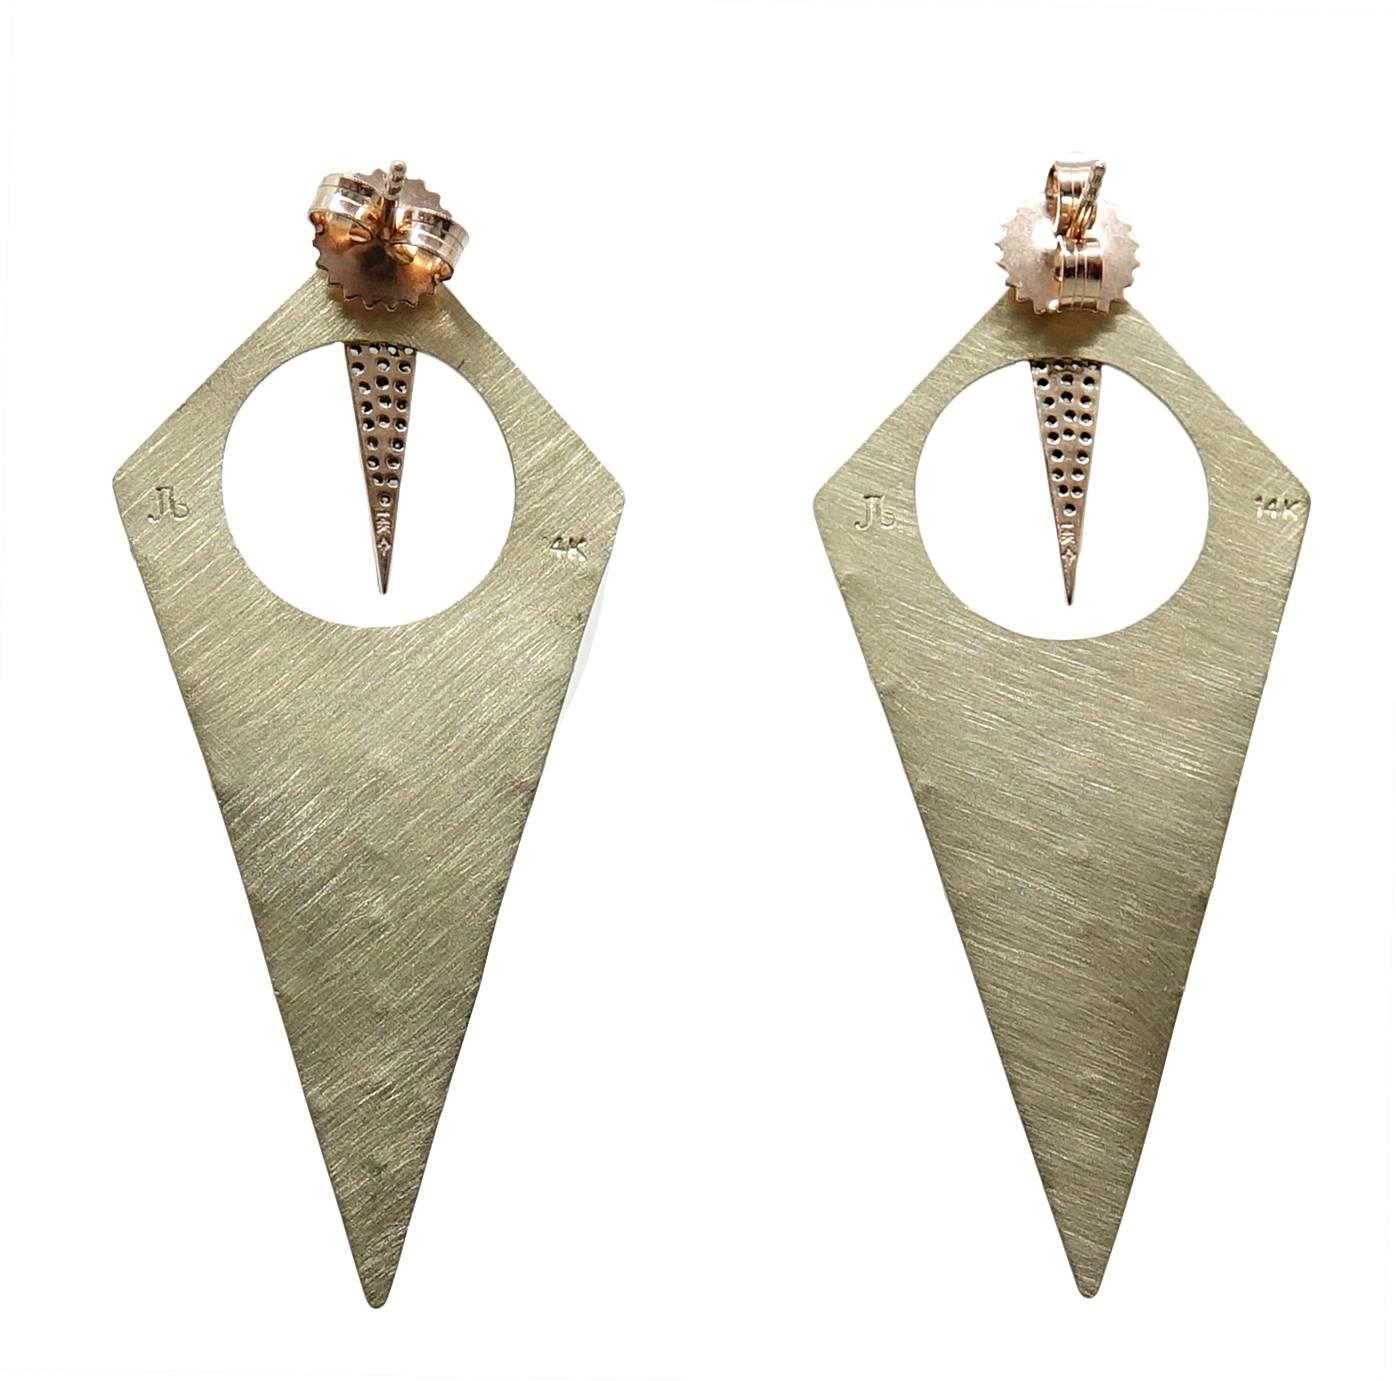 These Unique Julez Bryant Earrings Are 14K Yellow And Rose Gold. These Earrings Make Quite A Statement With Their Long Kite Design Giving The Piece An Edgy Look. Pave Diamond Daggers Are Added To The Top Of These Earrings. The Blackened Diamonds